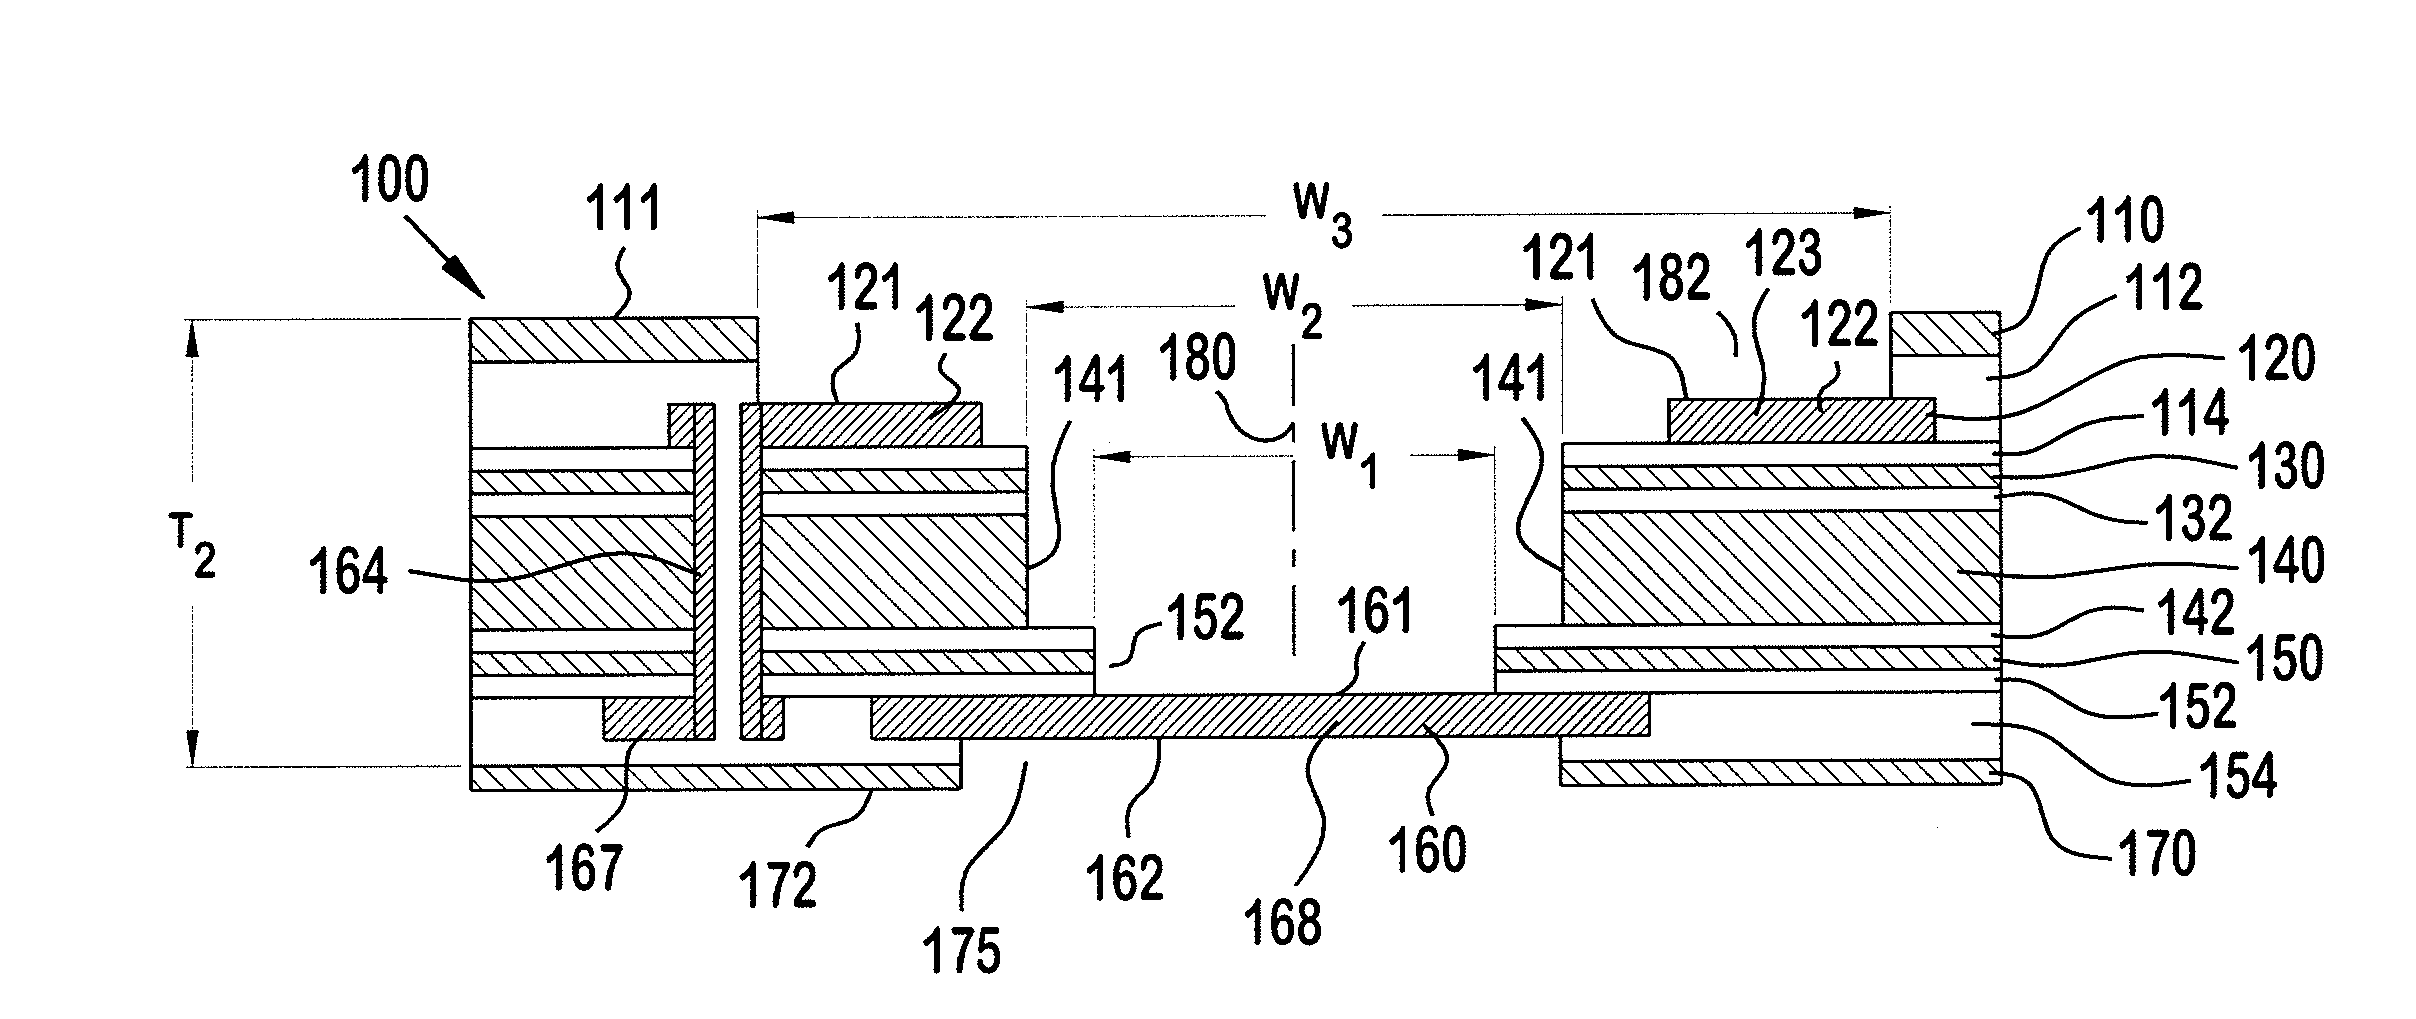 Method of embedding a pre-assembled unit including a device into a flexible printed circuit and corresponding assembly